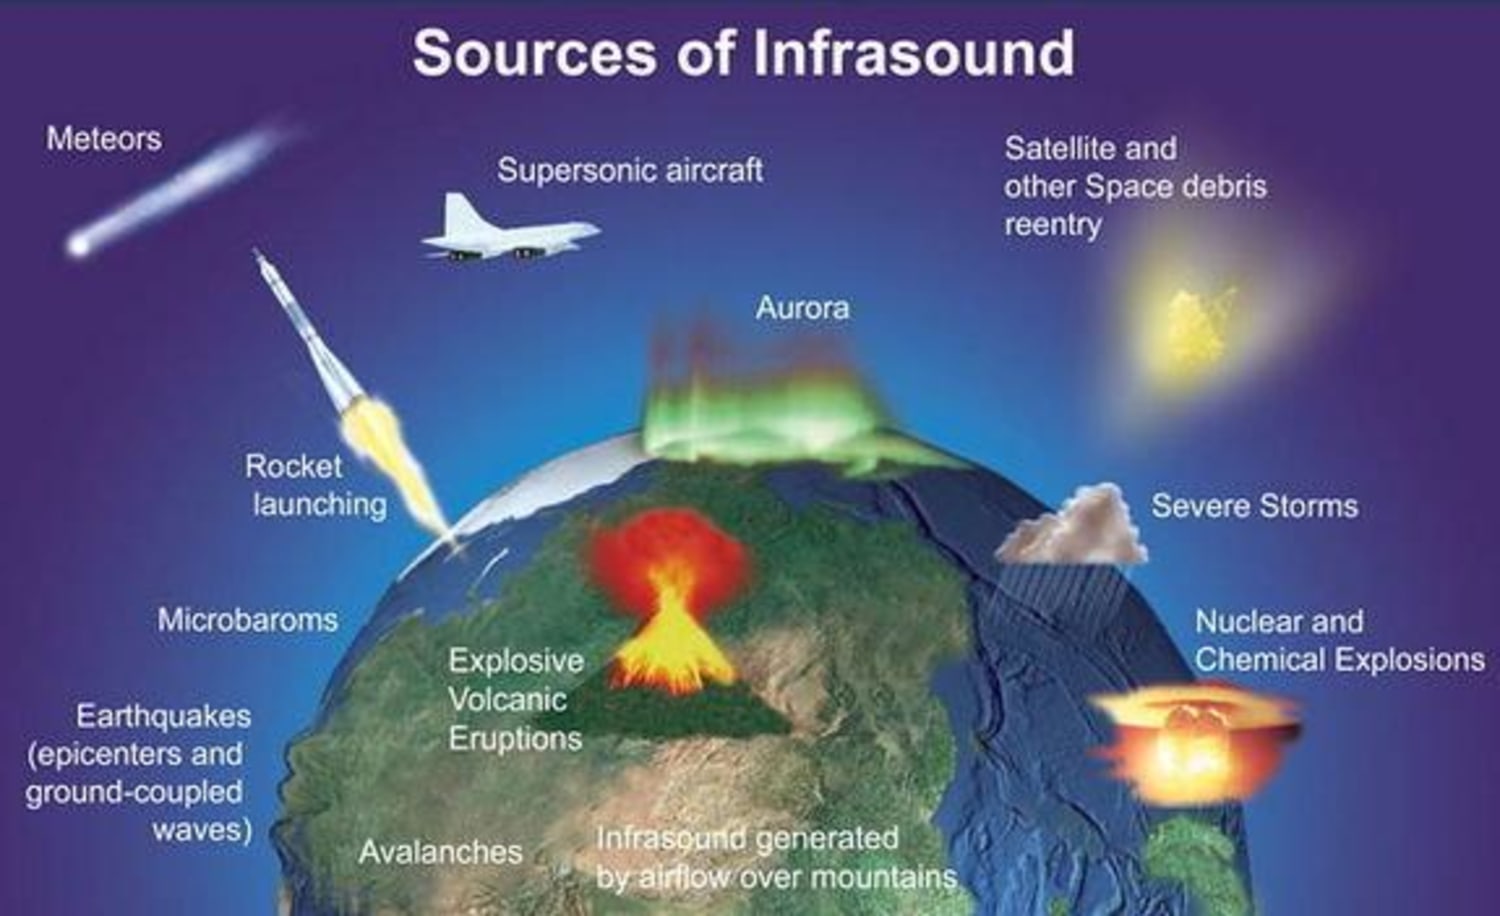 Explosive Sound Sources – Discovery of Sound in the Sea